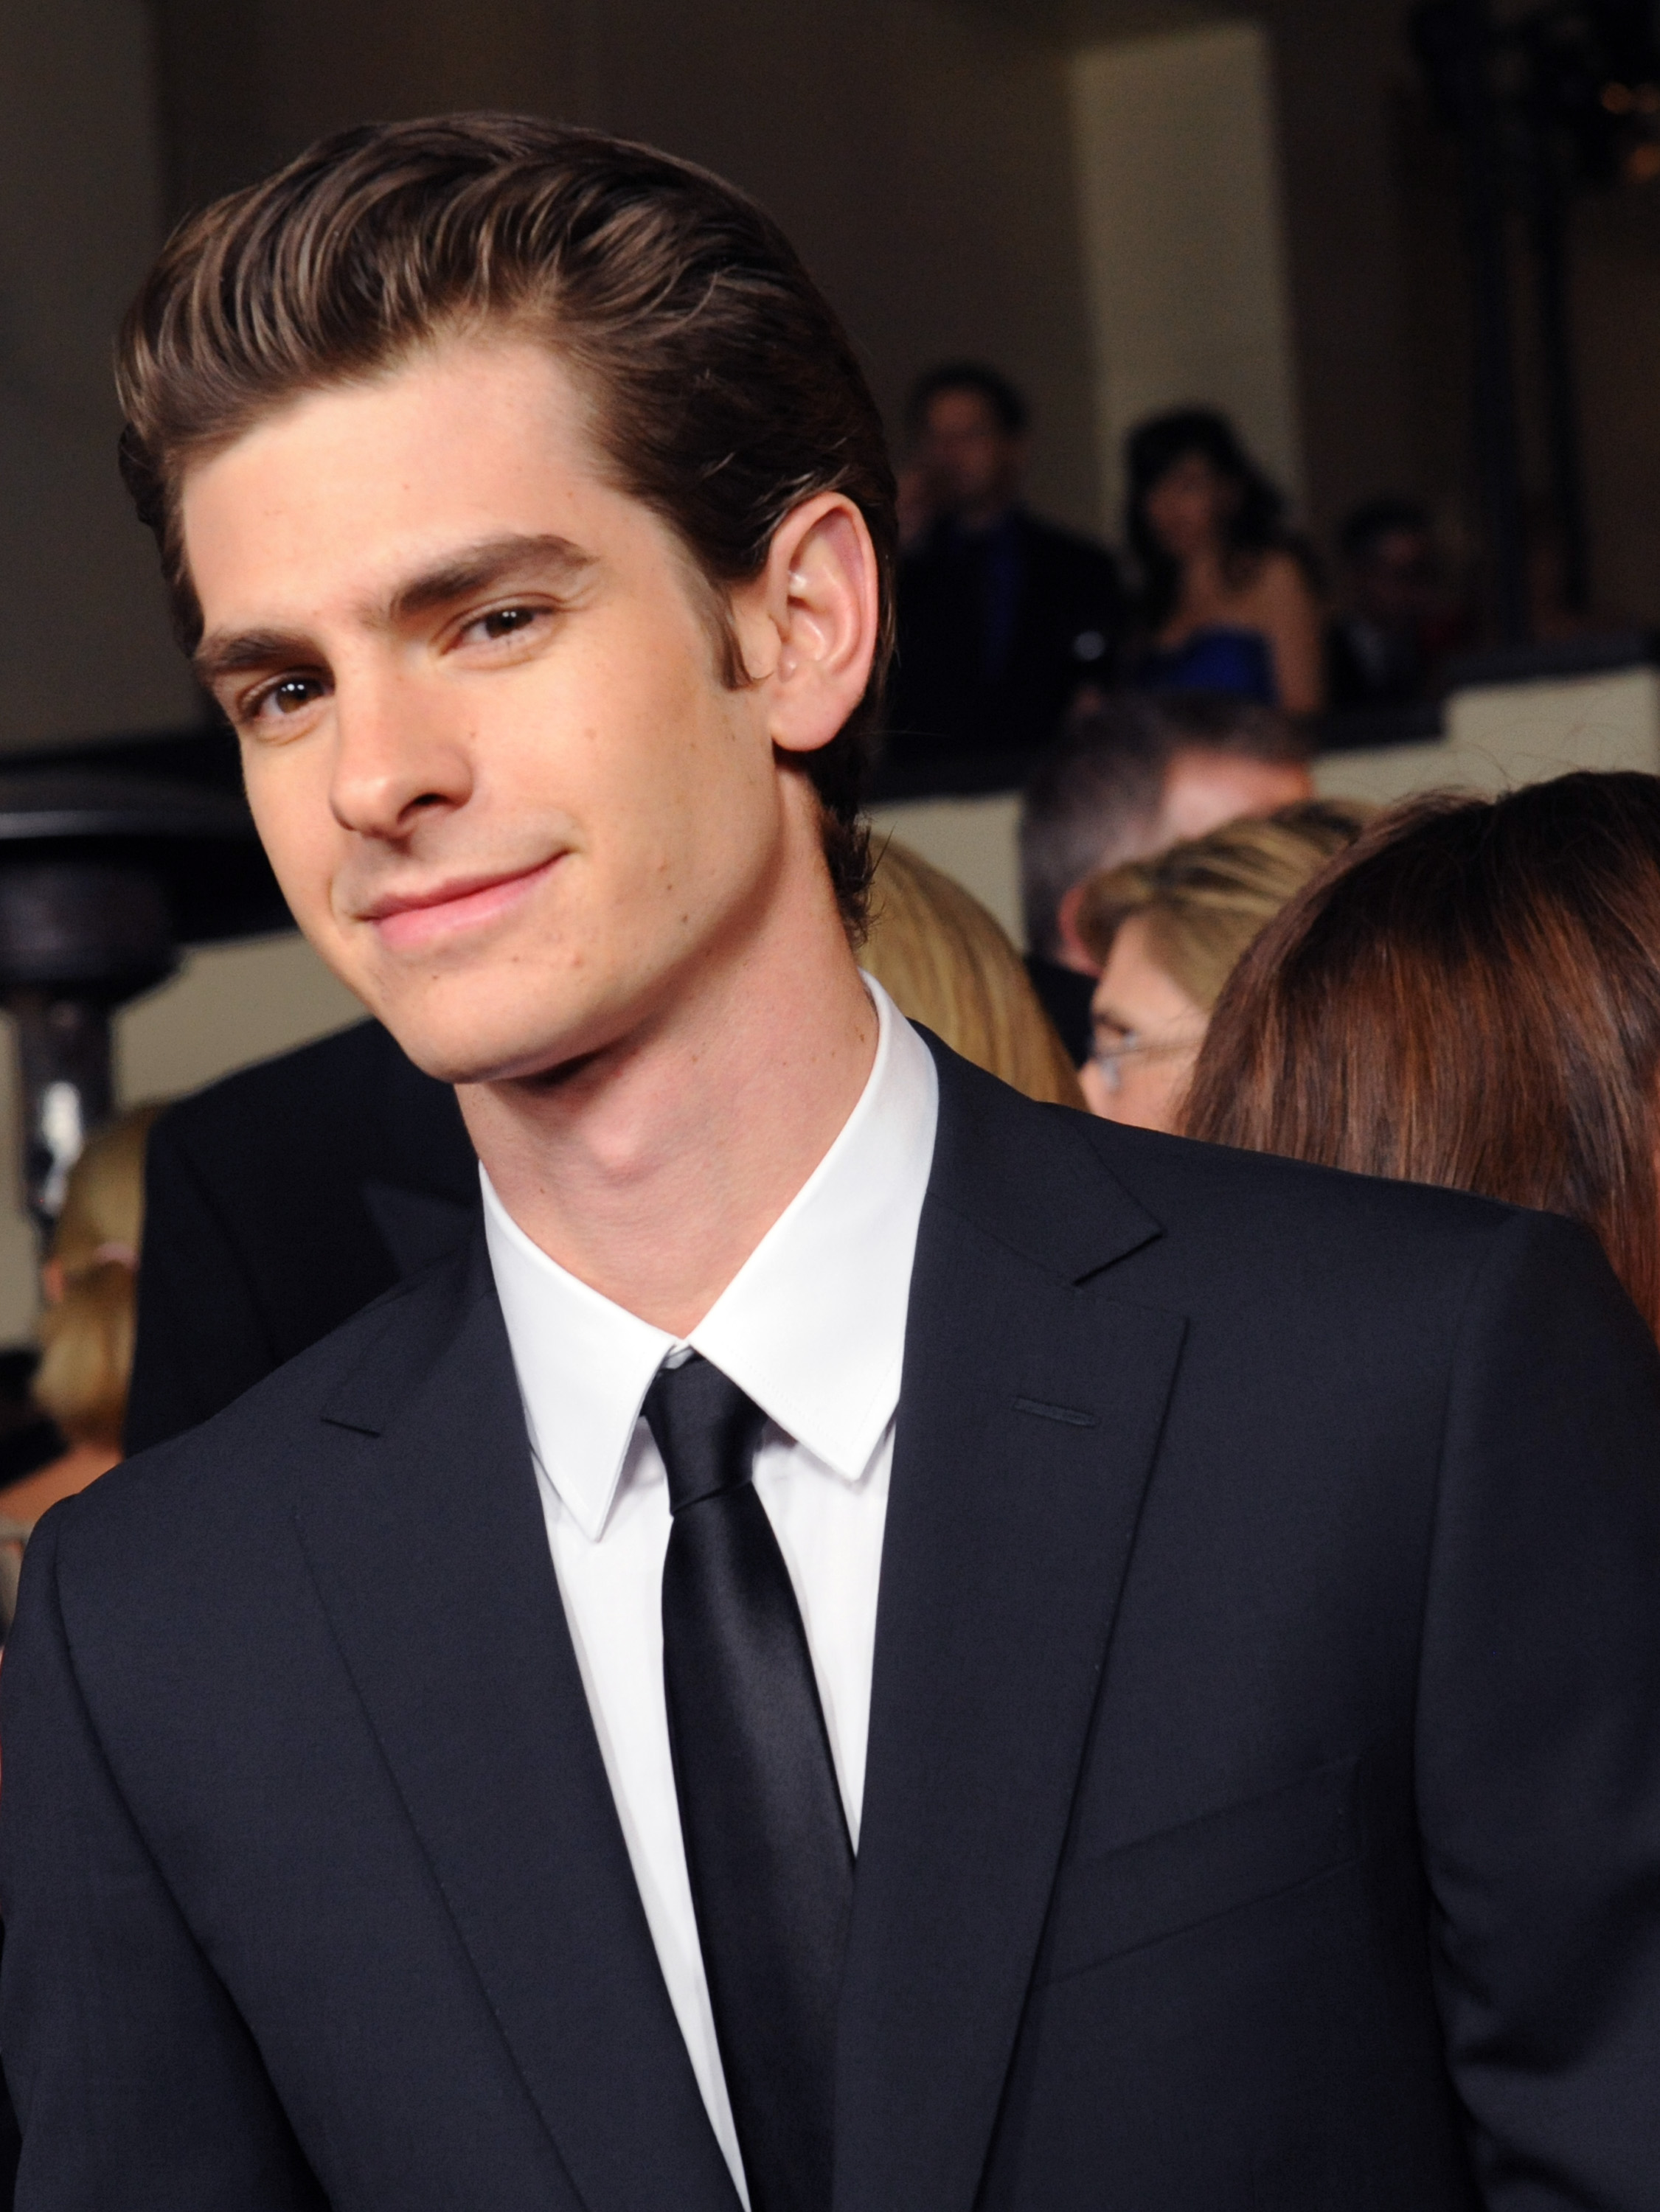 Andrew Garfield Wallpaper High Quality